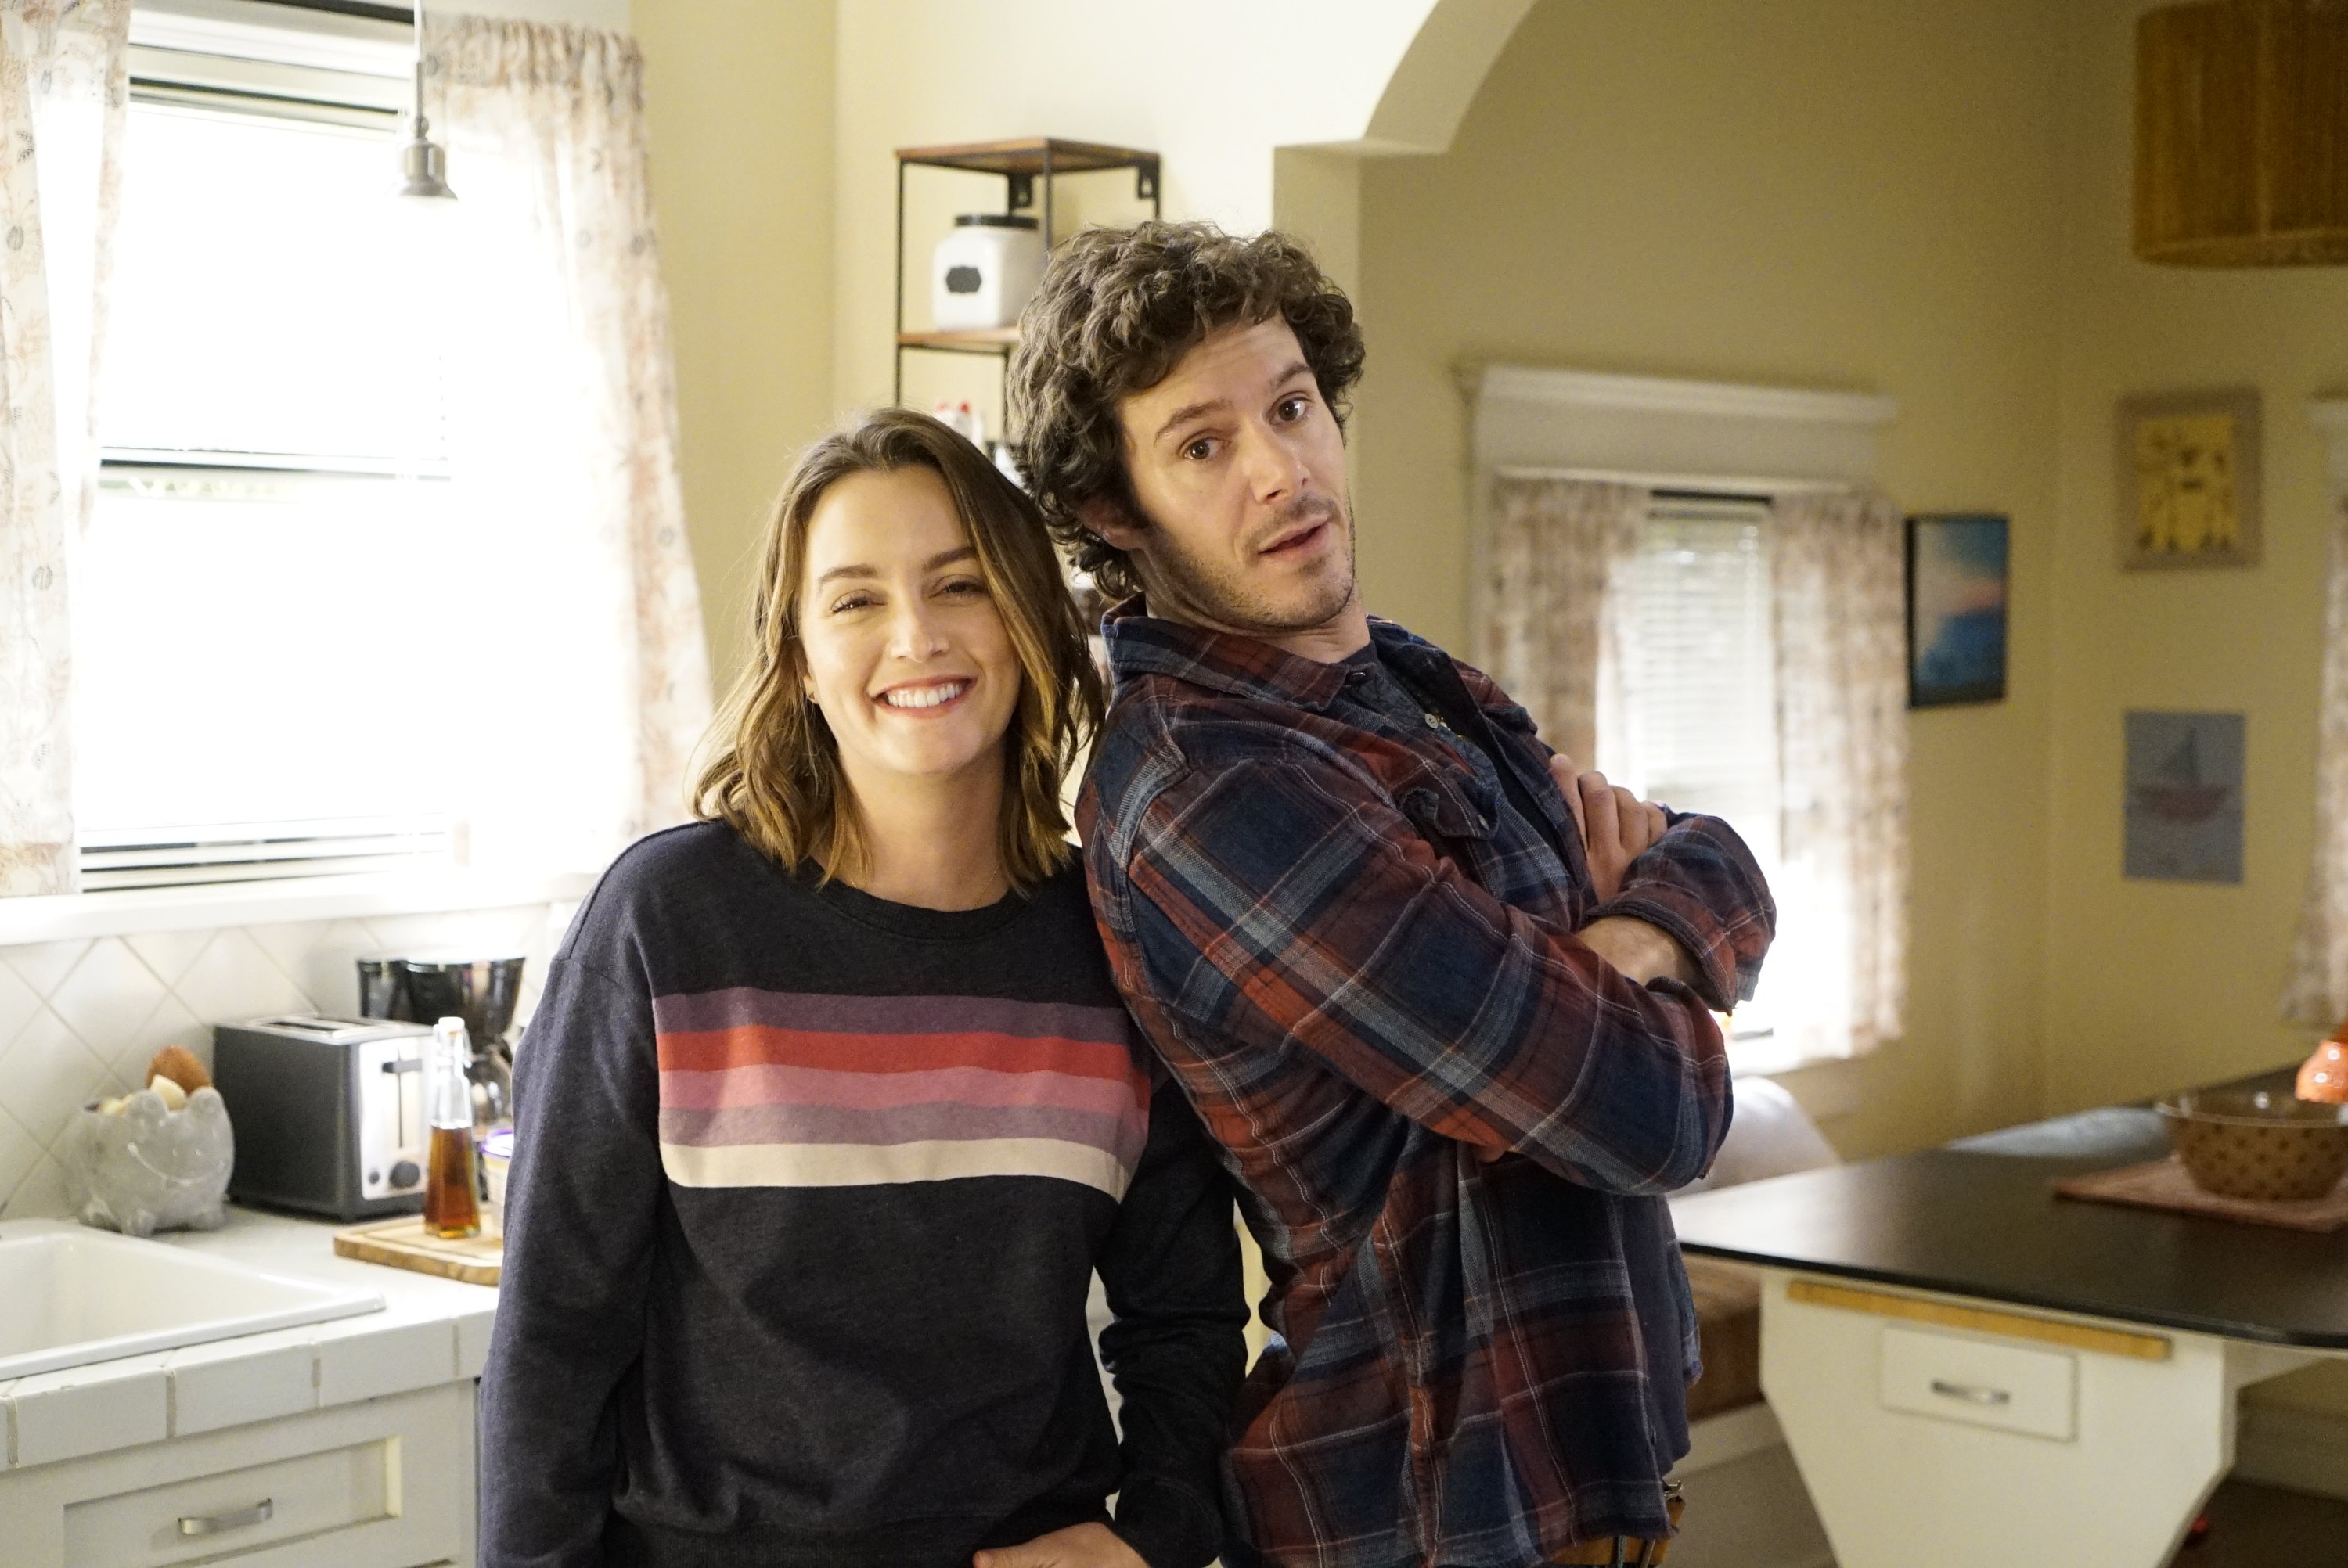 Adam Brody and Leighton Meester on the set of ABC's 'Single Parents', 2019 | Source: Getty Images